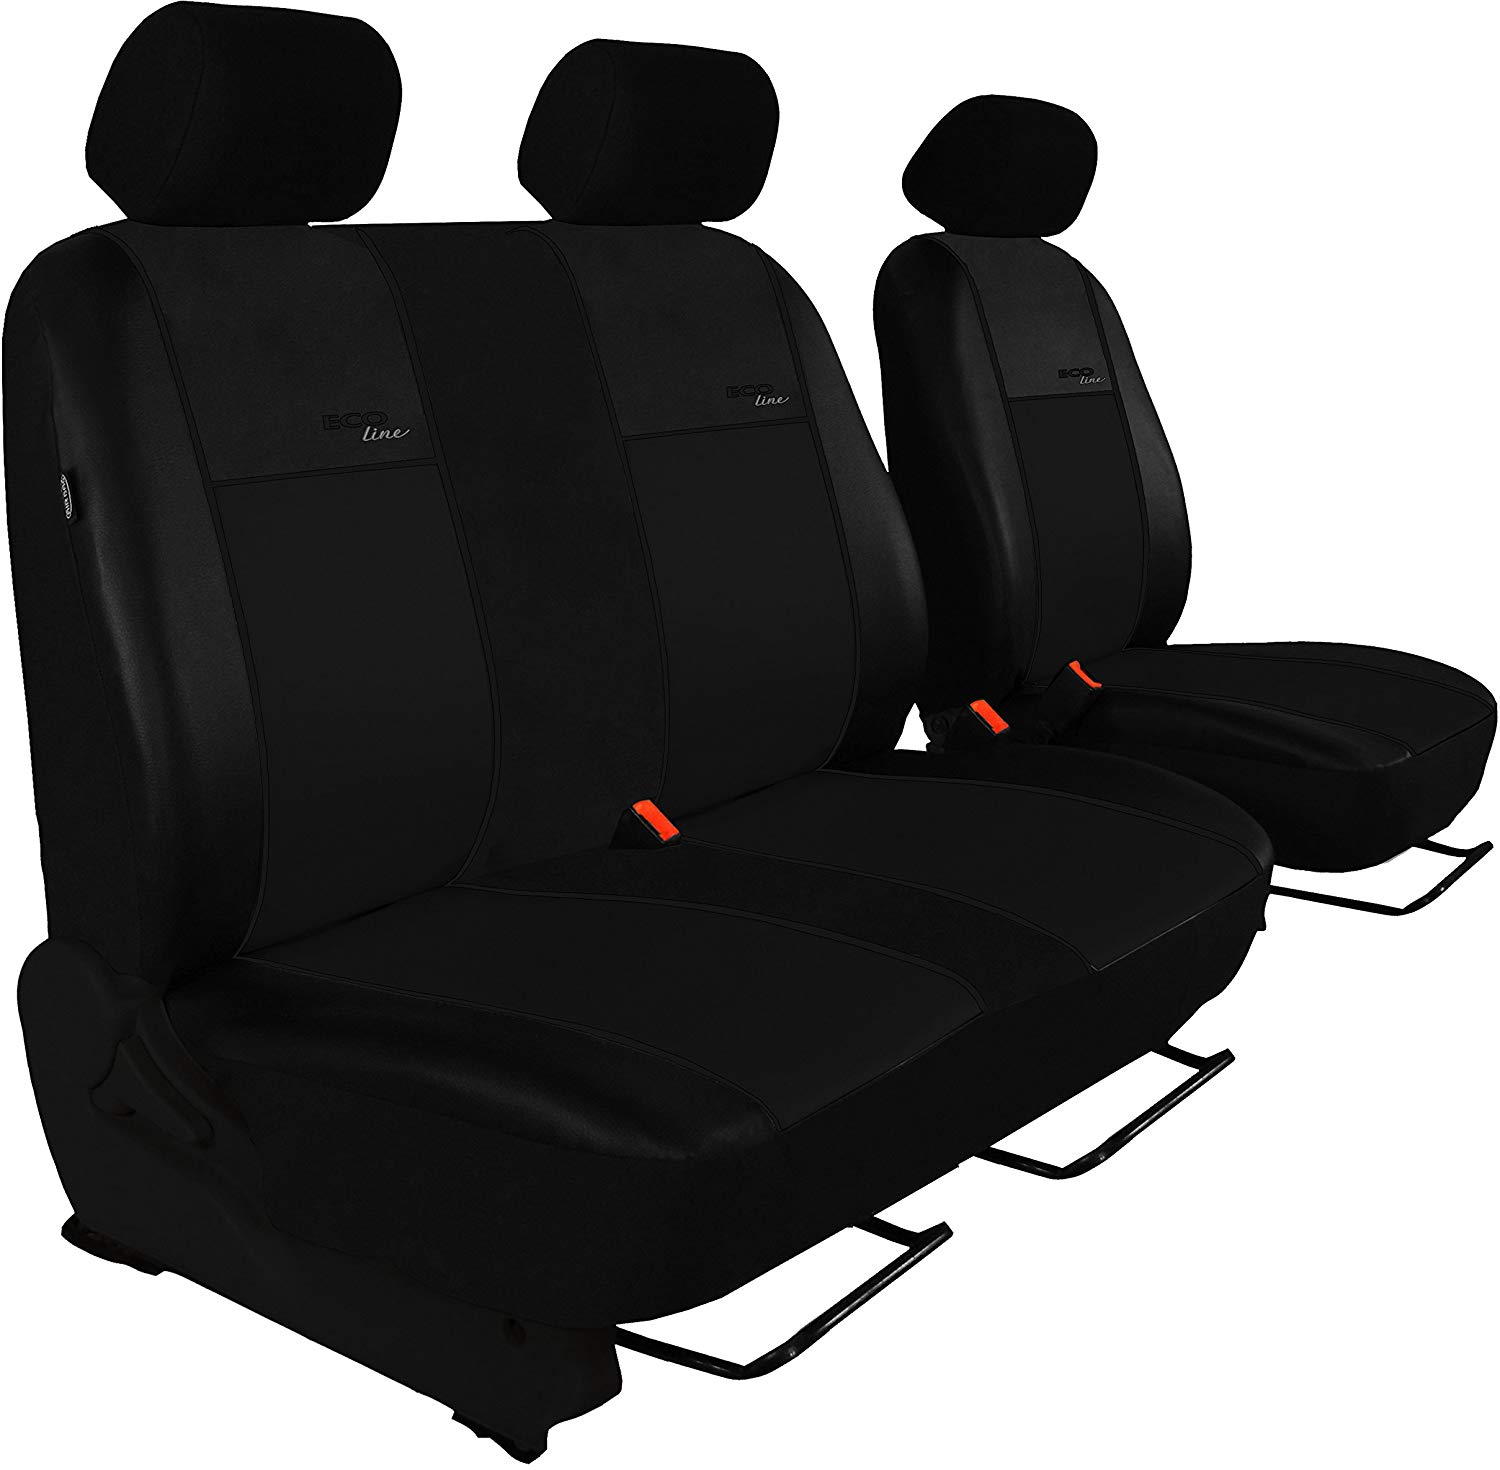 Custom Fit Seat Cover for T5 Transporter Driver\'s Seat + 2 Passenger Bench Design Eco-Line. It has a black Slat